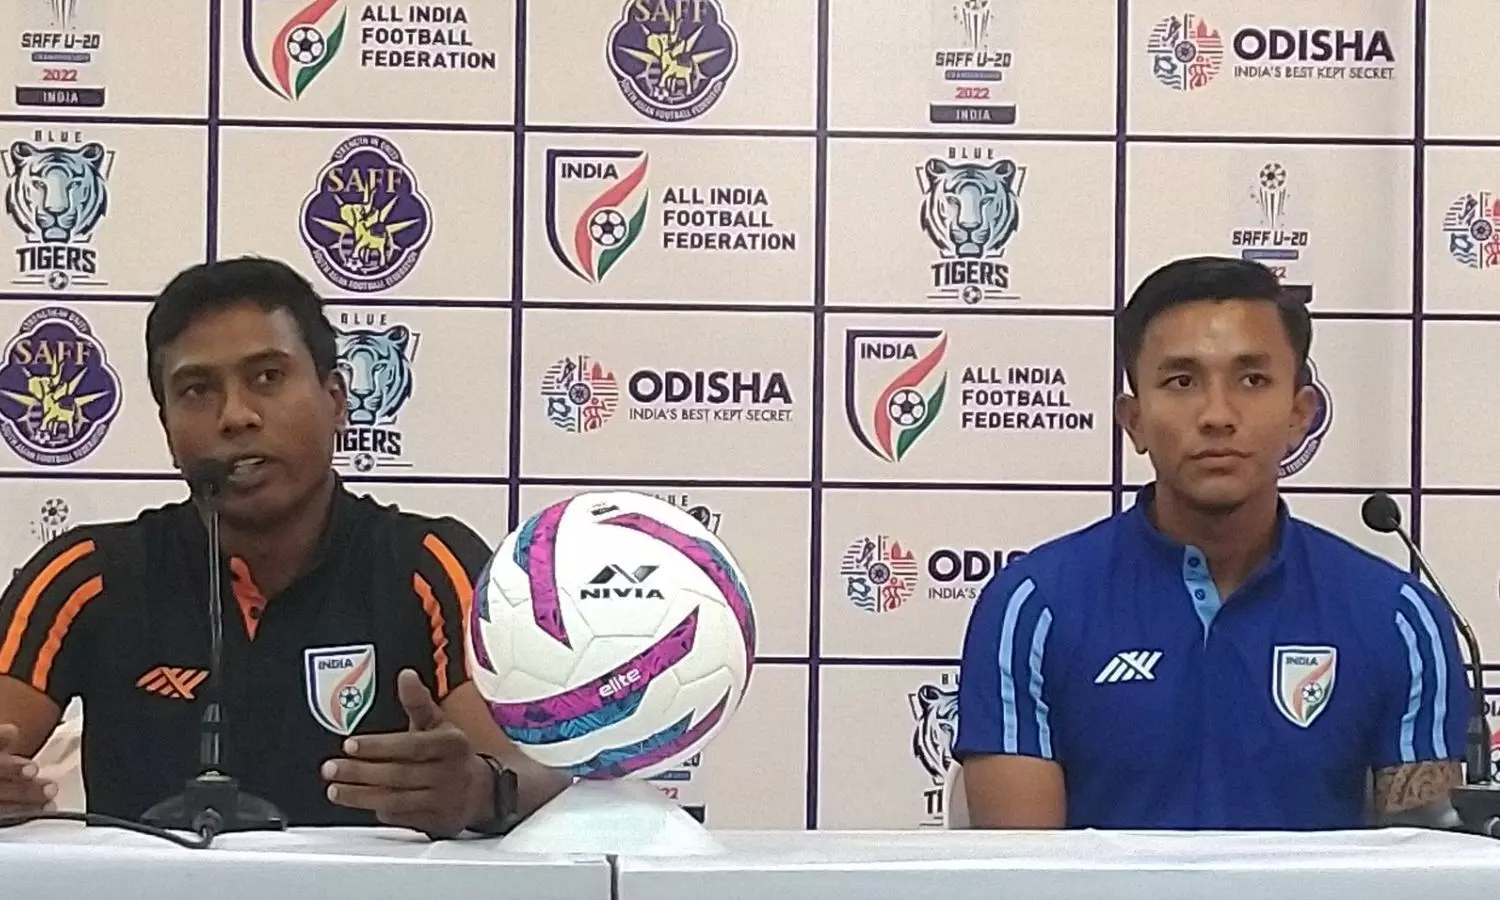 SAFF U-20 Championship 2022 Preview, Schedule, Indian squad, When to Watch, Live Stream